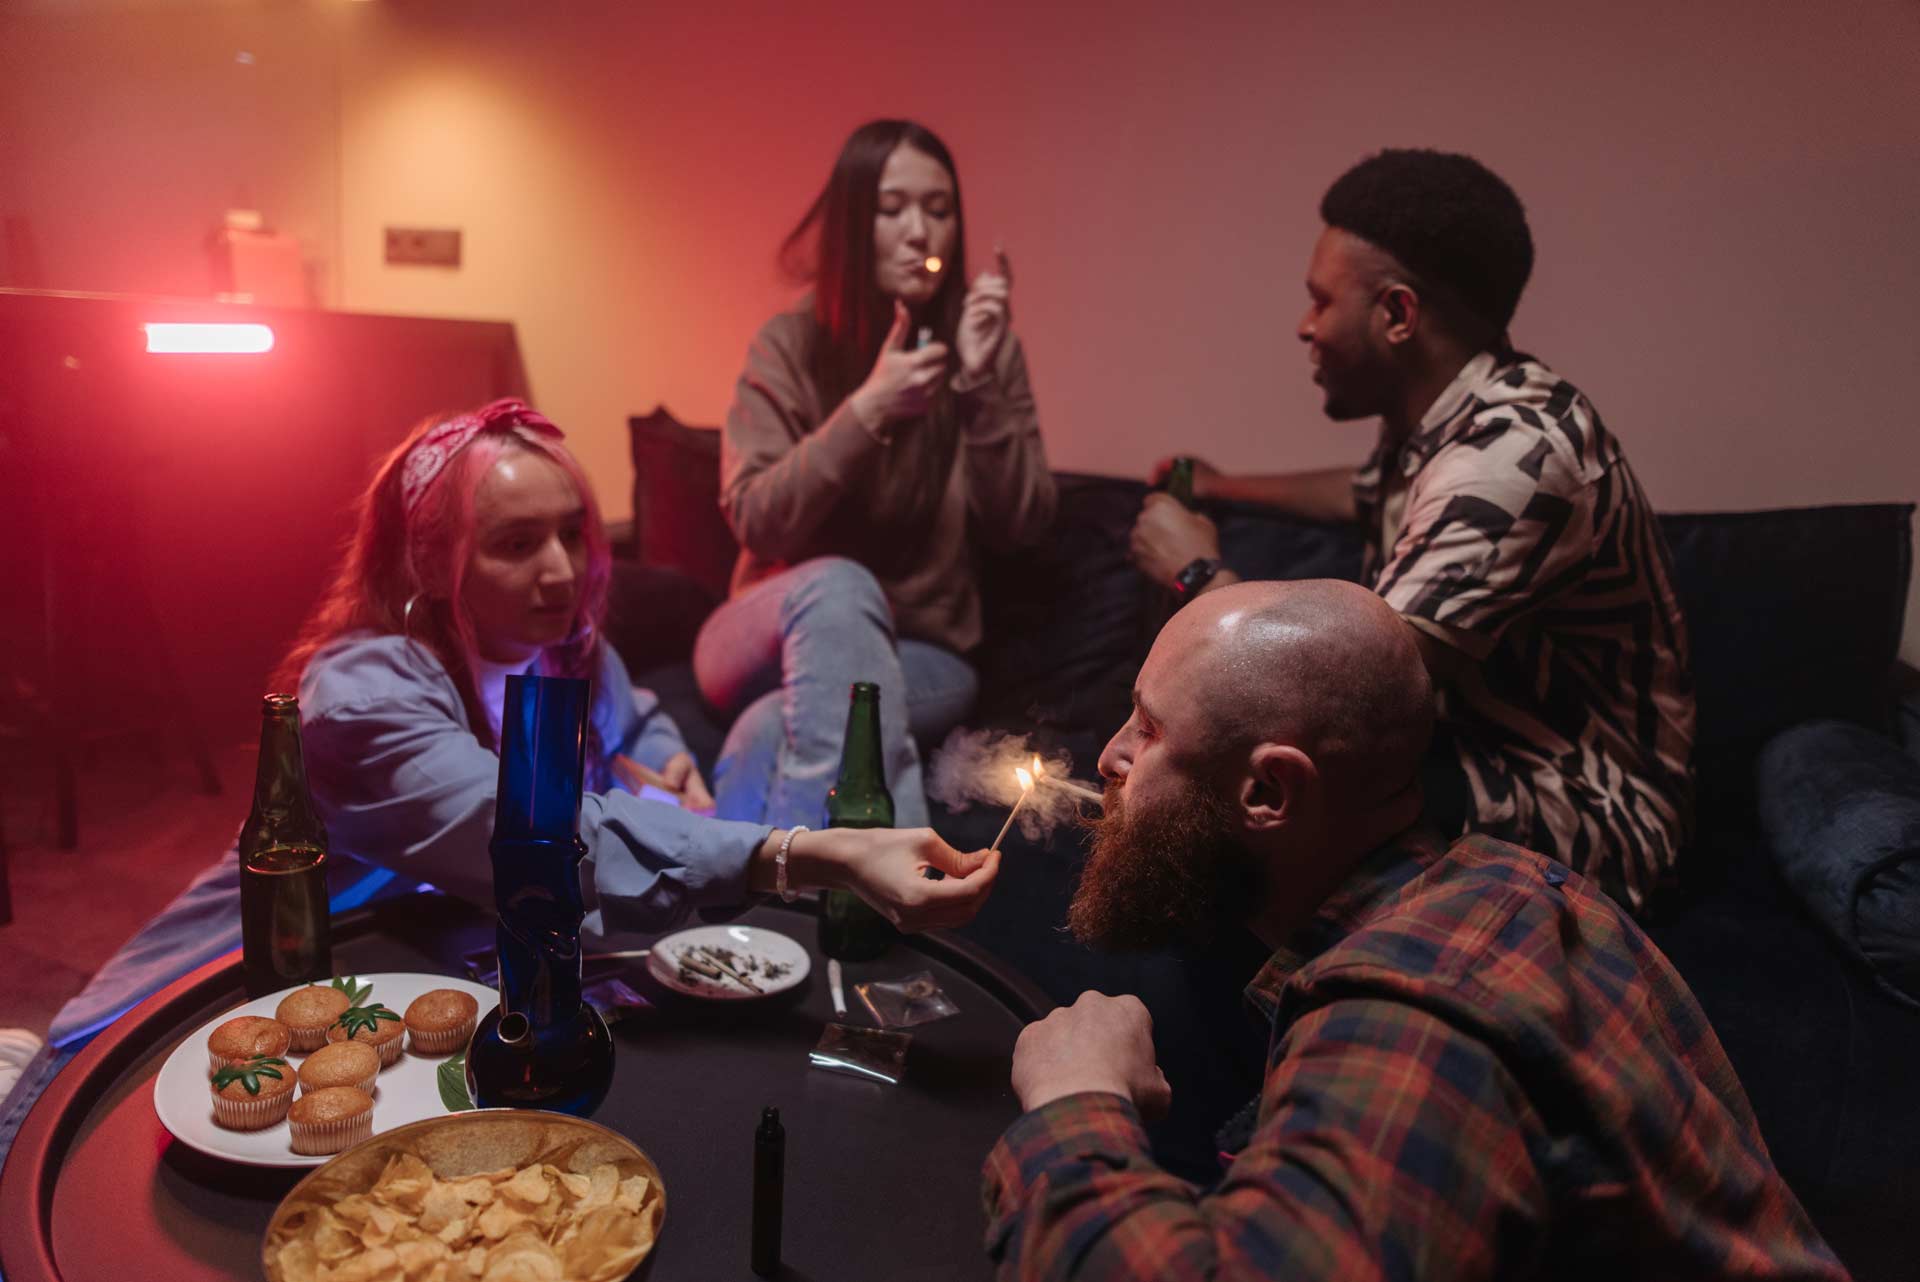 group of people smoking and eating cannabis cupcakes